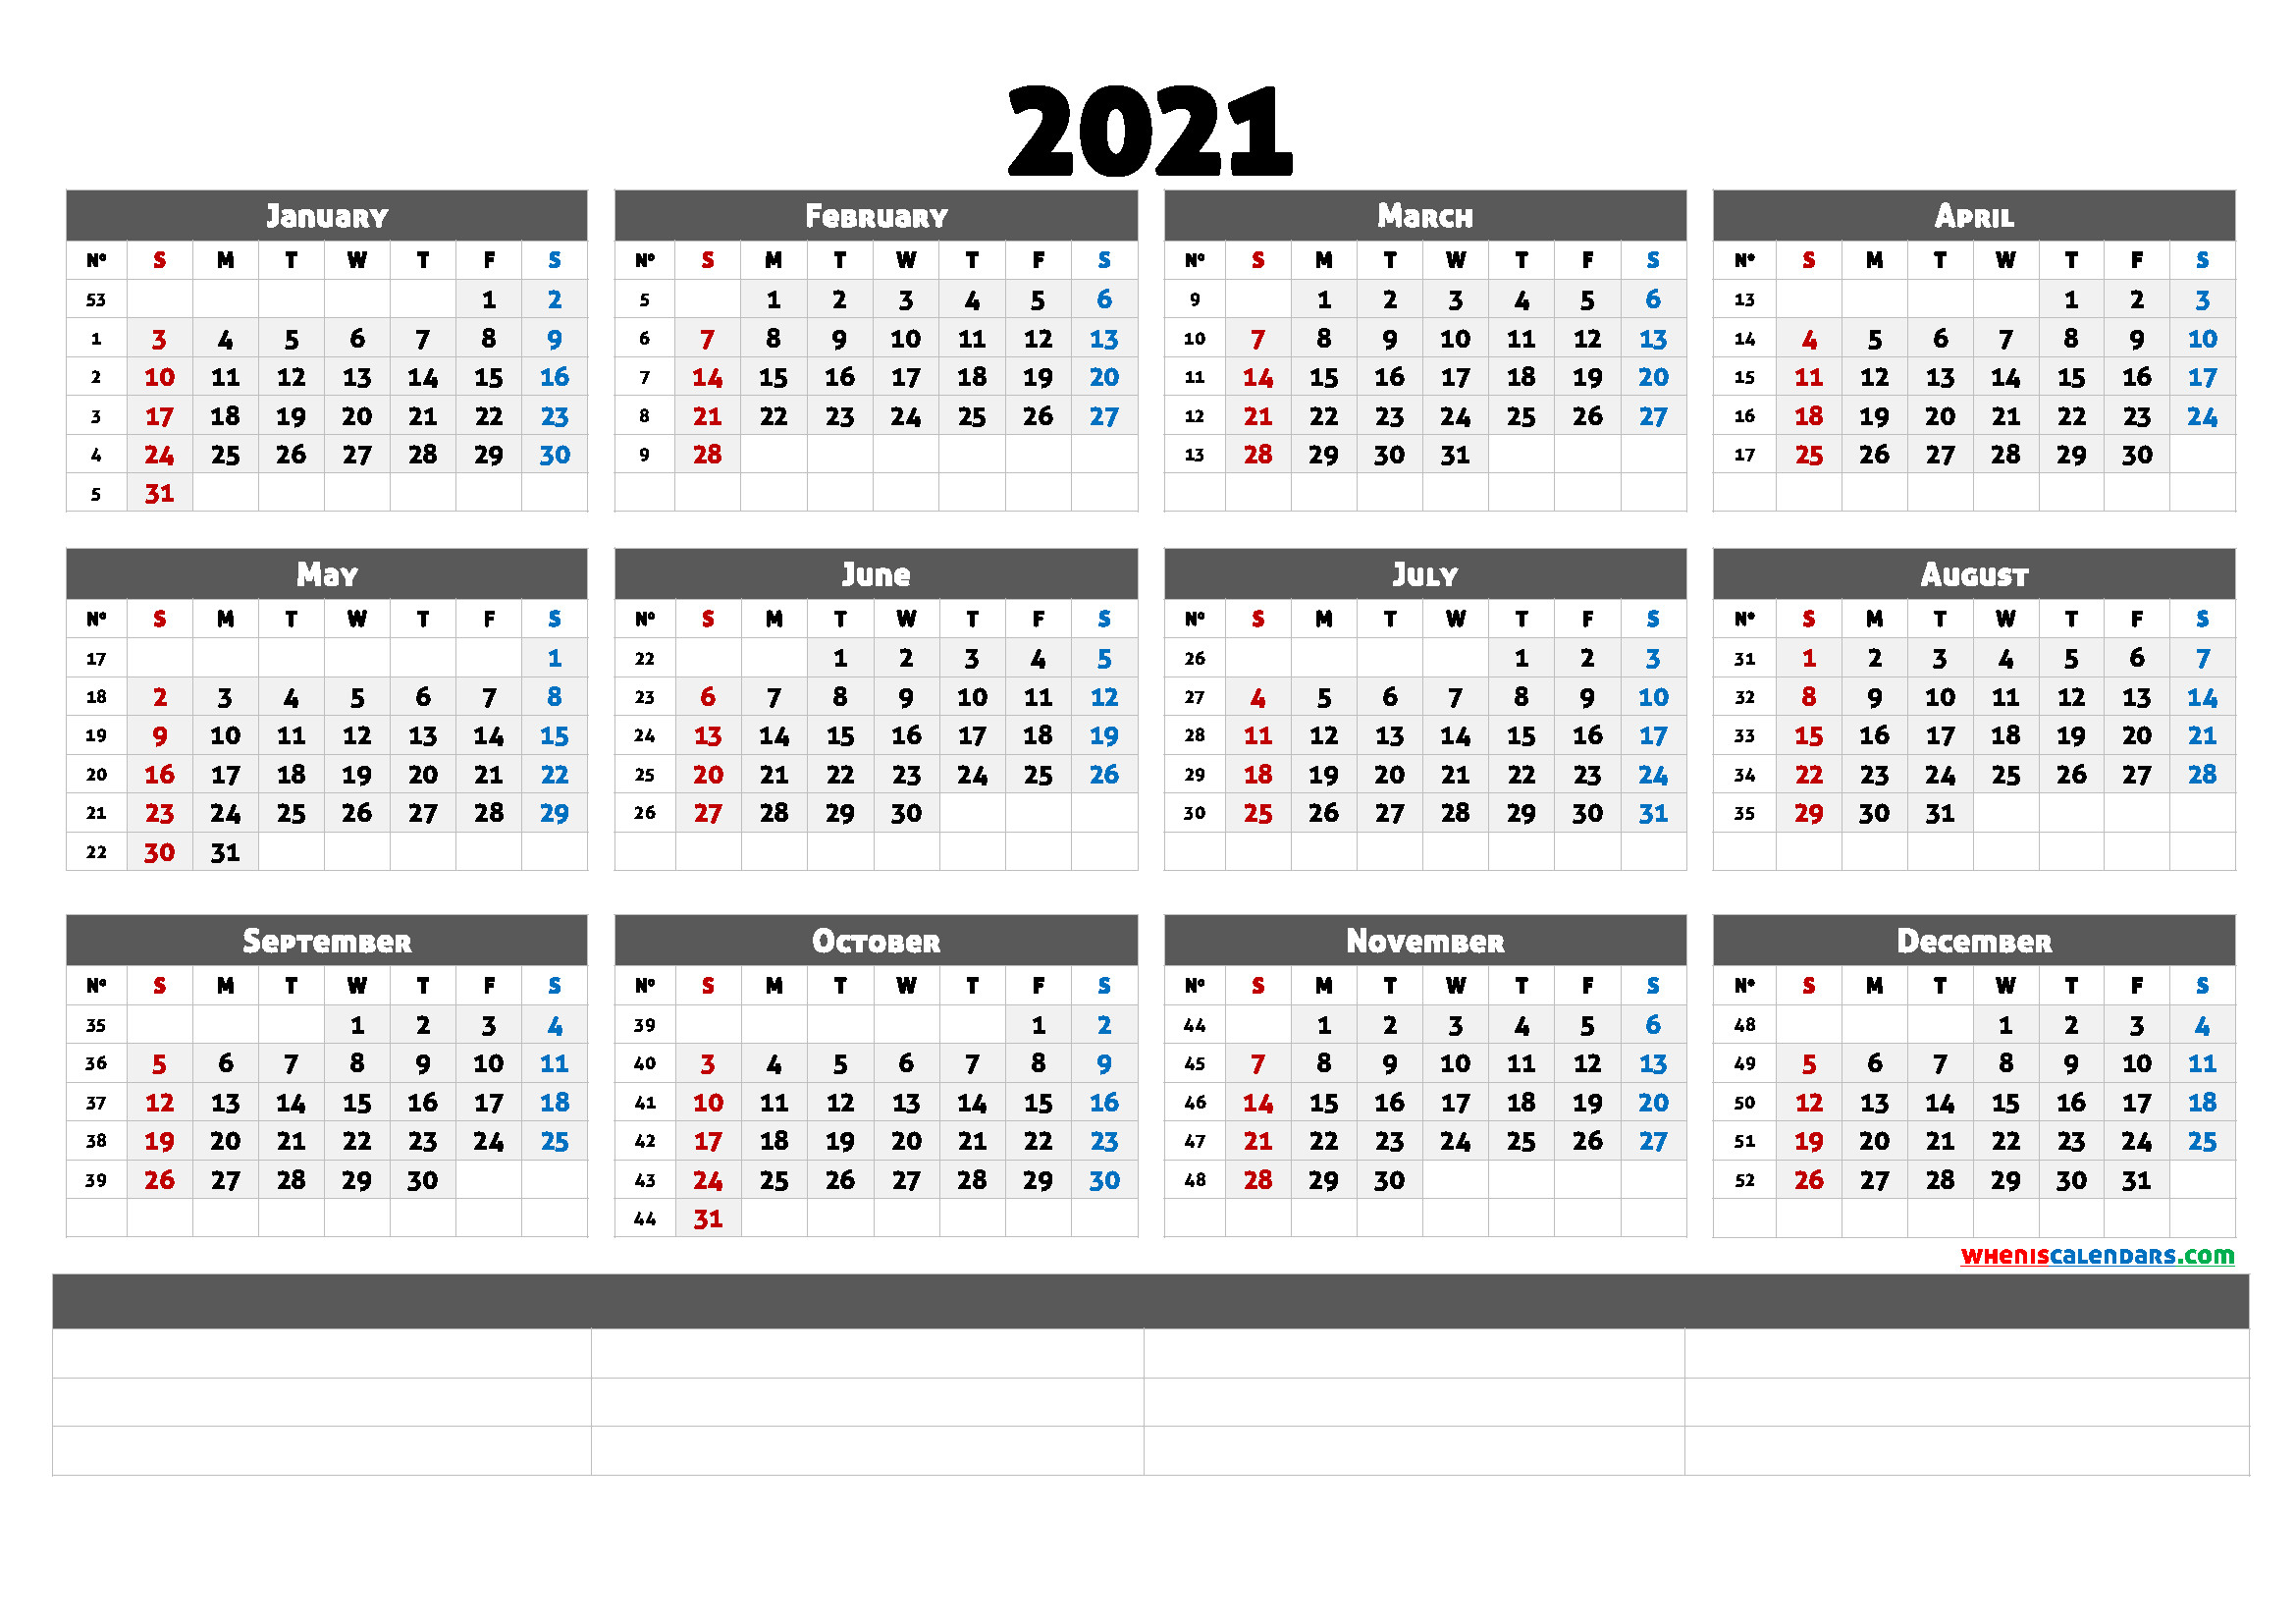 2021 Free Yearly Calendar Template Word (6 Templates)-2021 Calendar Template Word